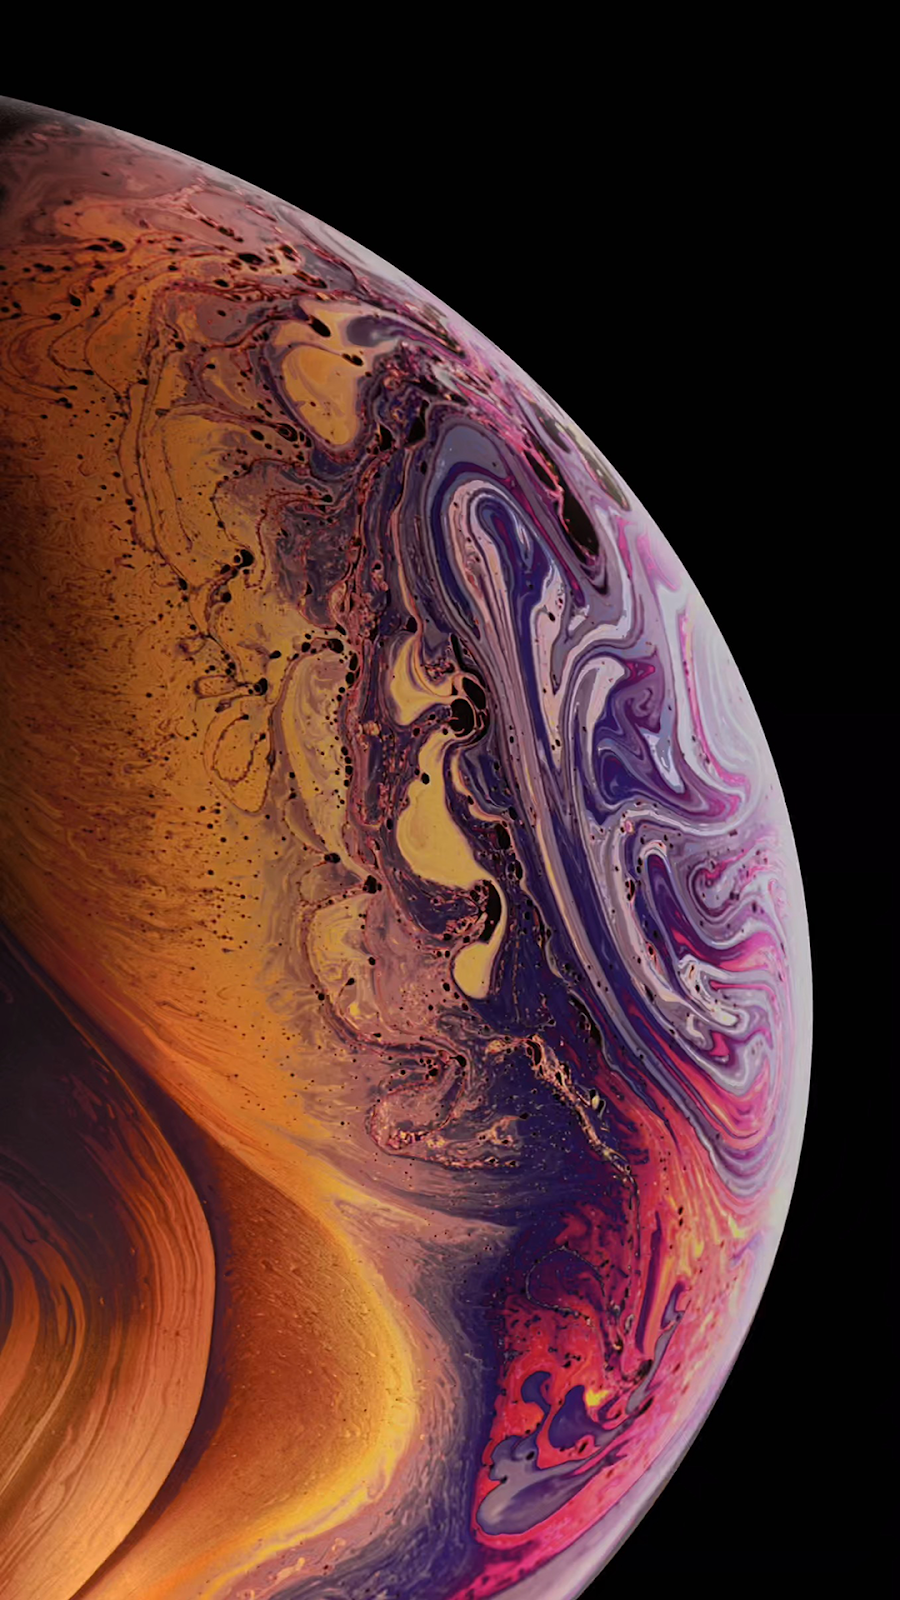 iPhone XR XS Wallpapers Free Download 4K HD iPhone XR XS Max